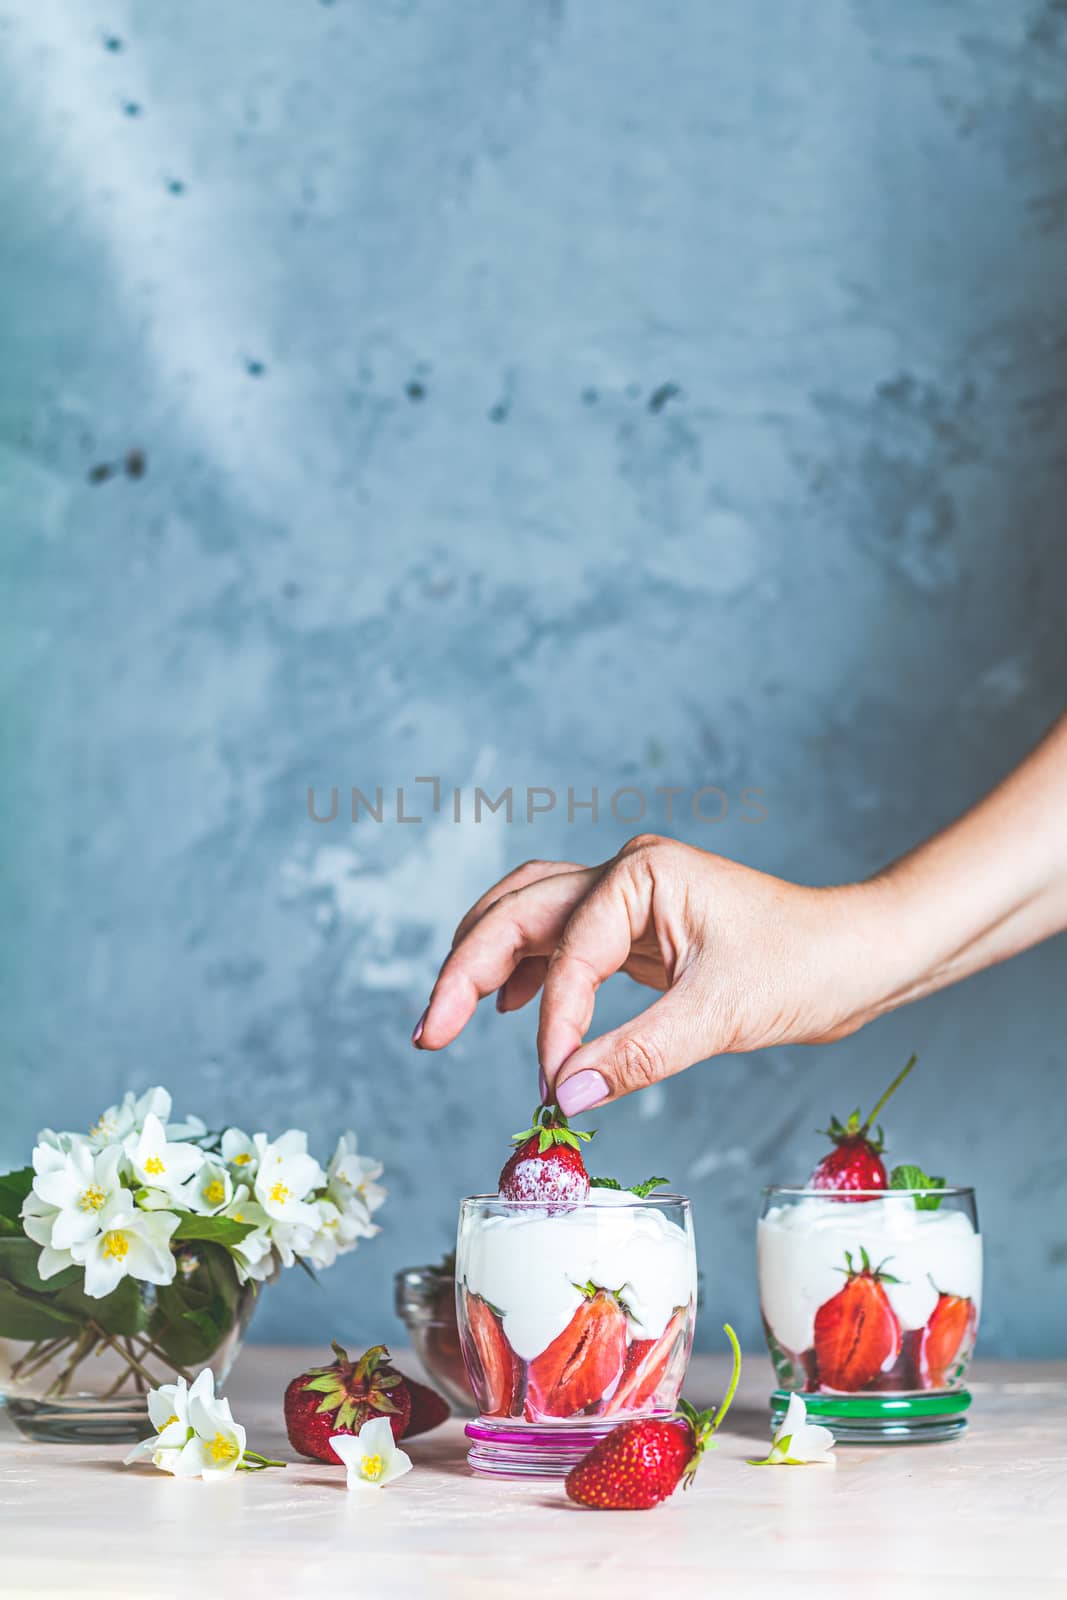 Woman hand holding cream strawberry. Glass bowl of strawberries with whipped cream and mint. Jasmine flowers. Concrete surface, copy space  for you text.